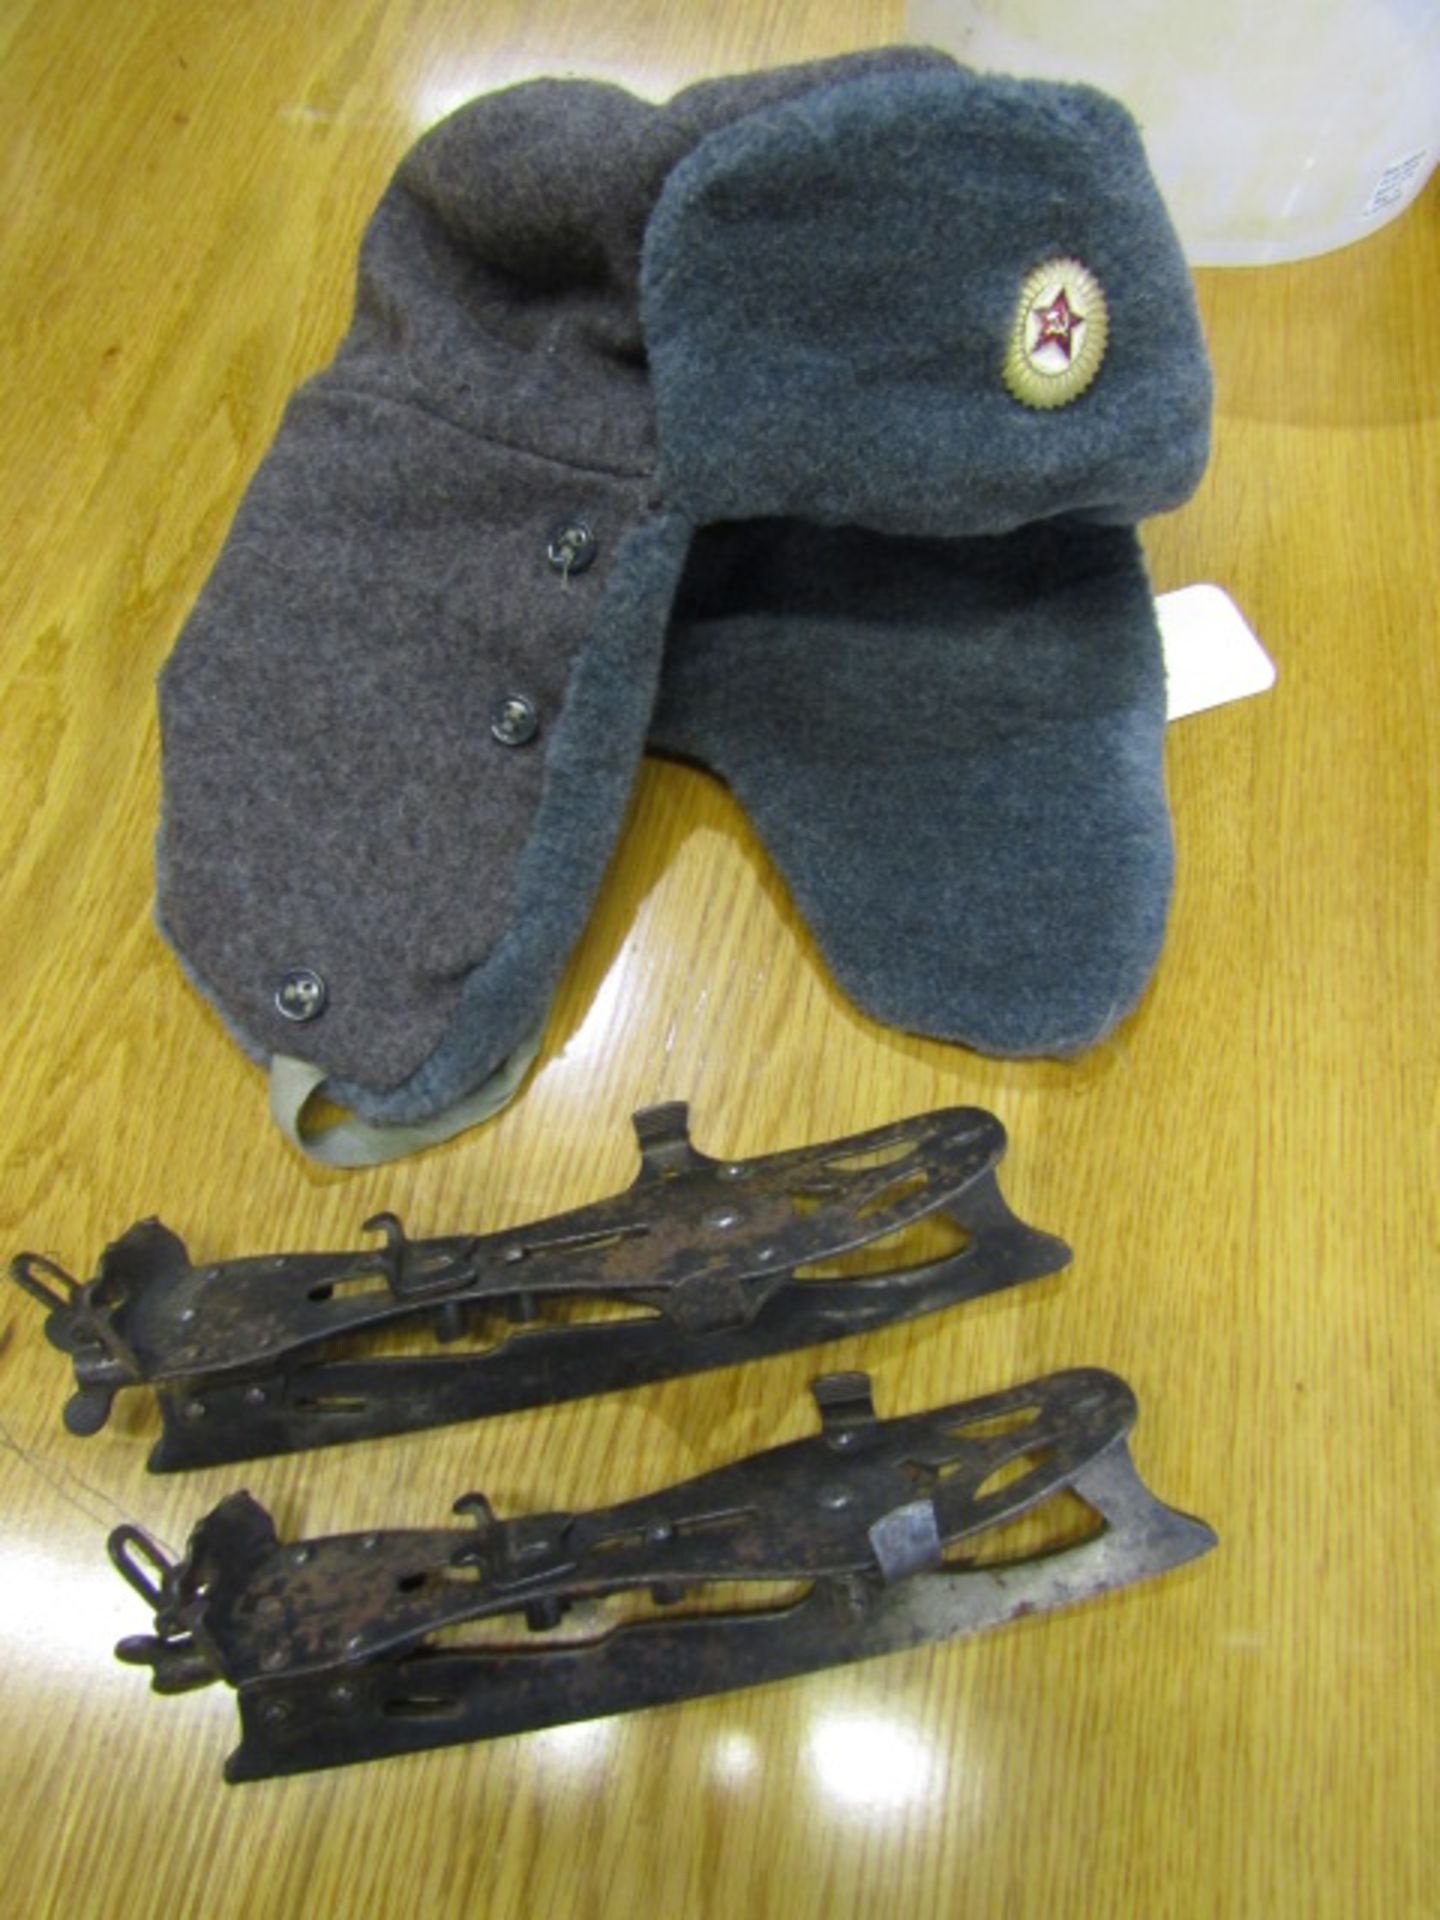 A Russian style hat and fen skates